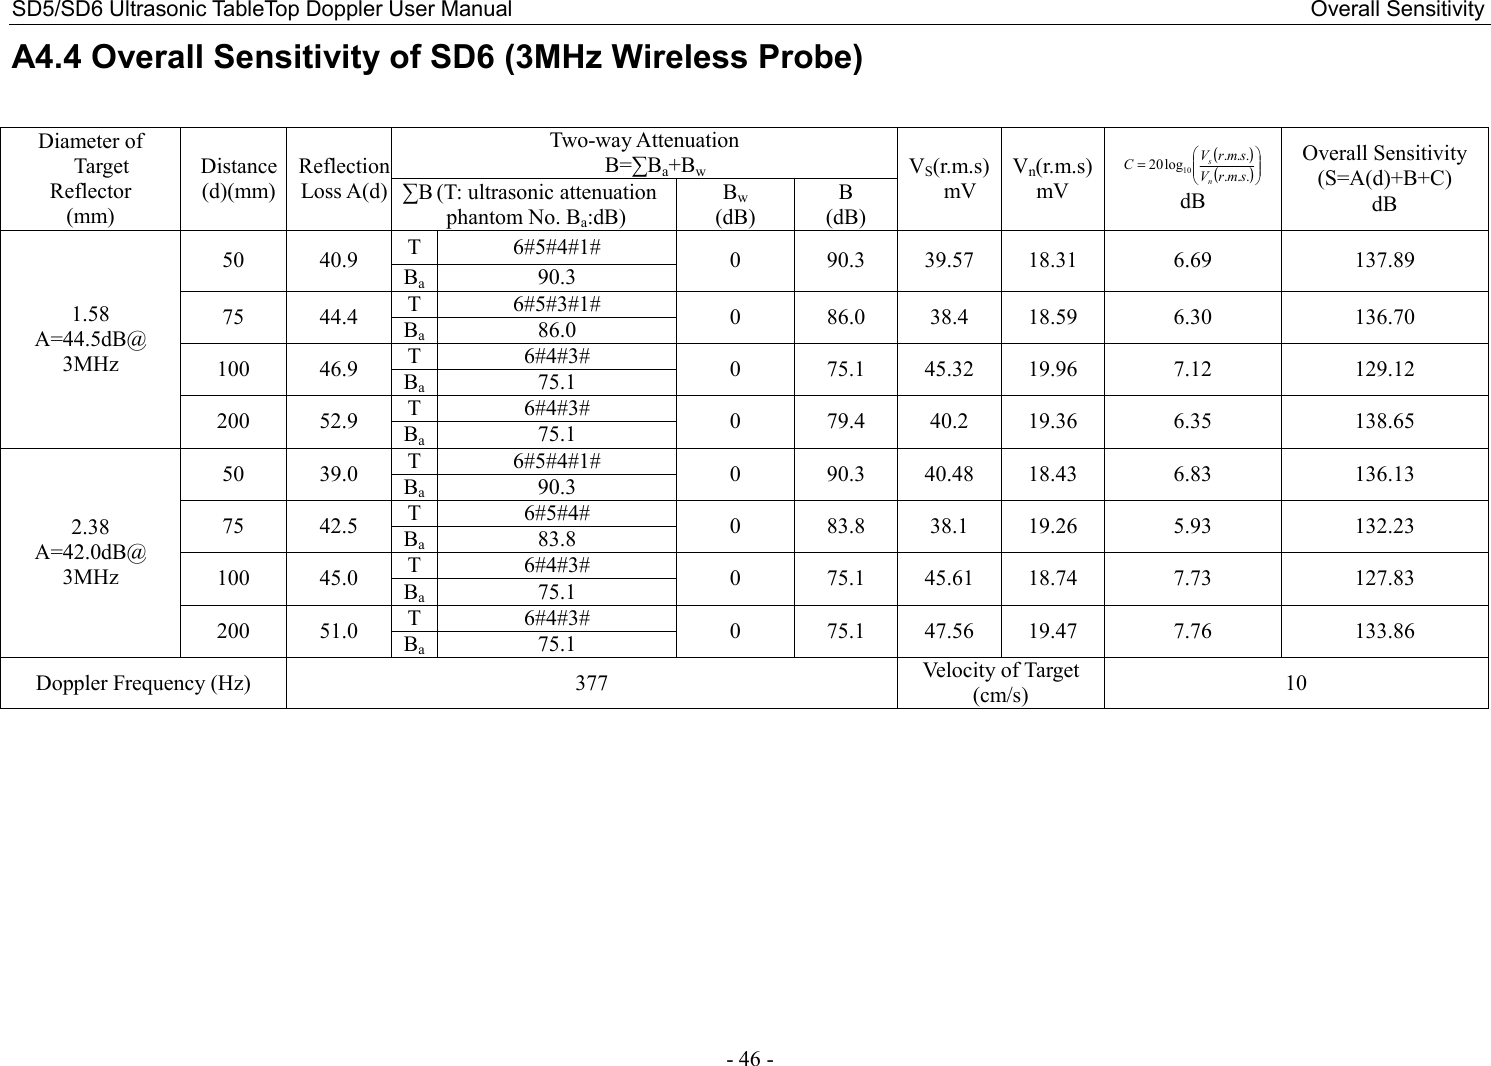 SD5/SD6 Ultrasonic TableTop Doppler User Manual                                                                                                                                                  Overall Sensitivity - 46 - A4.4 Overall Sensitivity of SD6 (3MHz Wireless Probe)  Diameter of Target Reflector (mm) Distance (d)(mm) Reflection Loss A(d) Two-way Attenuation B=∑Ba+Bw VS(r.m.s) mV Vn(r.m.s) mV ()( )=......log2010smrVsmrVCns dB Overall Sensitivity (S=A(d)+B+C) dB ∑B (T: ultrasonic attenuation   phantom No. Ba:dB) Bw (dB) B (dB) 1.58 A=44.5dB@ 3MHz 50  40.9  T 6#5#4#1#  0  90.3  39.57  18.31  6.69  137.89 Ba 90.3 75  44.4  T 6#5#3#1#  0  86.0  38.4  18.59  6.30  136.70 Ba 86.0 100  46.9  T 6#4#3#  0  75.1  45.32  19.96  7.12  129.12 Ba 75.1 200  52.9  T 6#4#3#  0  79.4  40.2  19.36  6.35  138.65 Ba 75.1 2.38 A=42.0dB@ 3MHz 50  39.0  T 6#5#4#1#  0  90.3  40.48  18.43  6.83  136.13 Ba 90.3 75  42.5  T 6#5#4#  0  83.8  38.1  19.26  5.93  132.23 Ba 83.8 100  45.0  T 6#4#3#  0  75.1  45.61  18.74  7.73  127.83 Ba 75.1 200  51.0  T 6#4#3#  0  75.1  47.56  19.47  7.76  133.86 Ba 75.1 Doppler Frequency (Hz)  377  Velocity of Target (cm/s)  10  